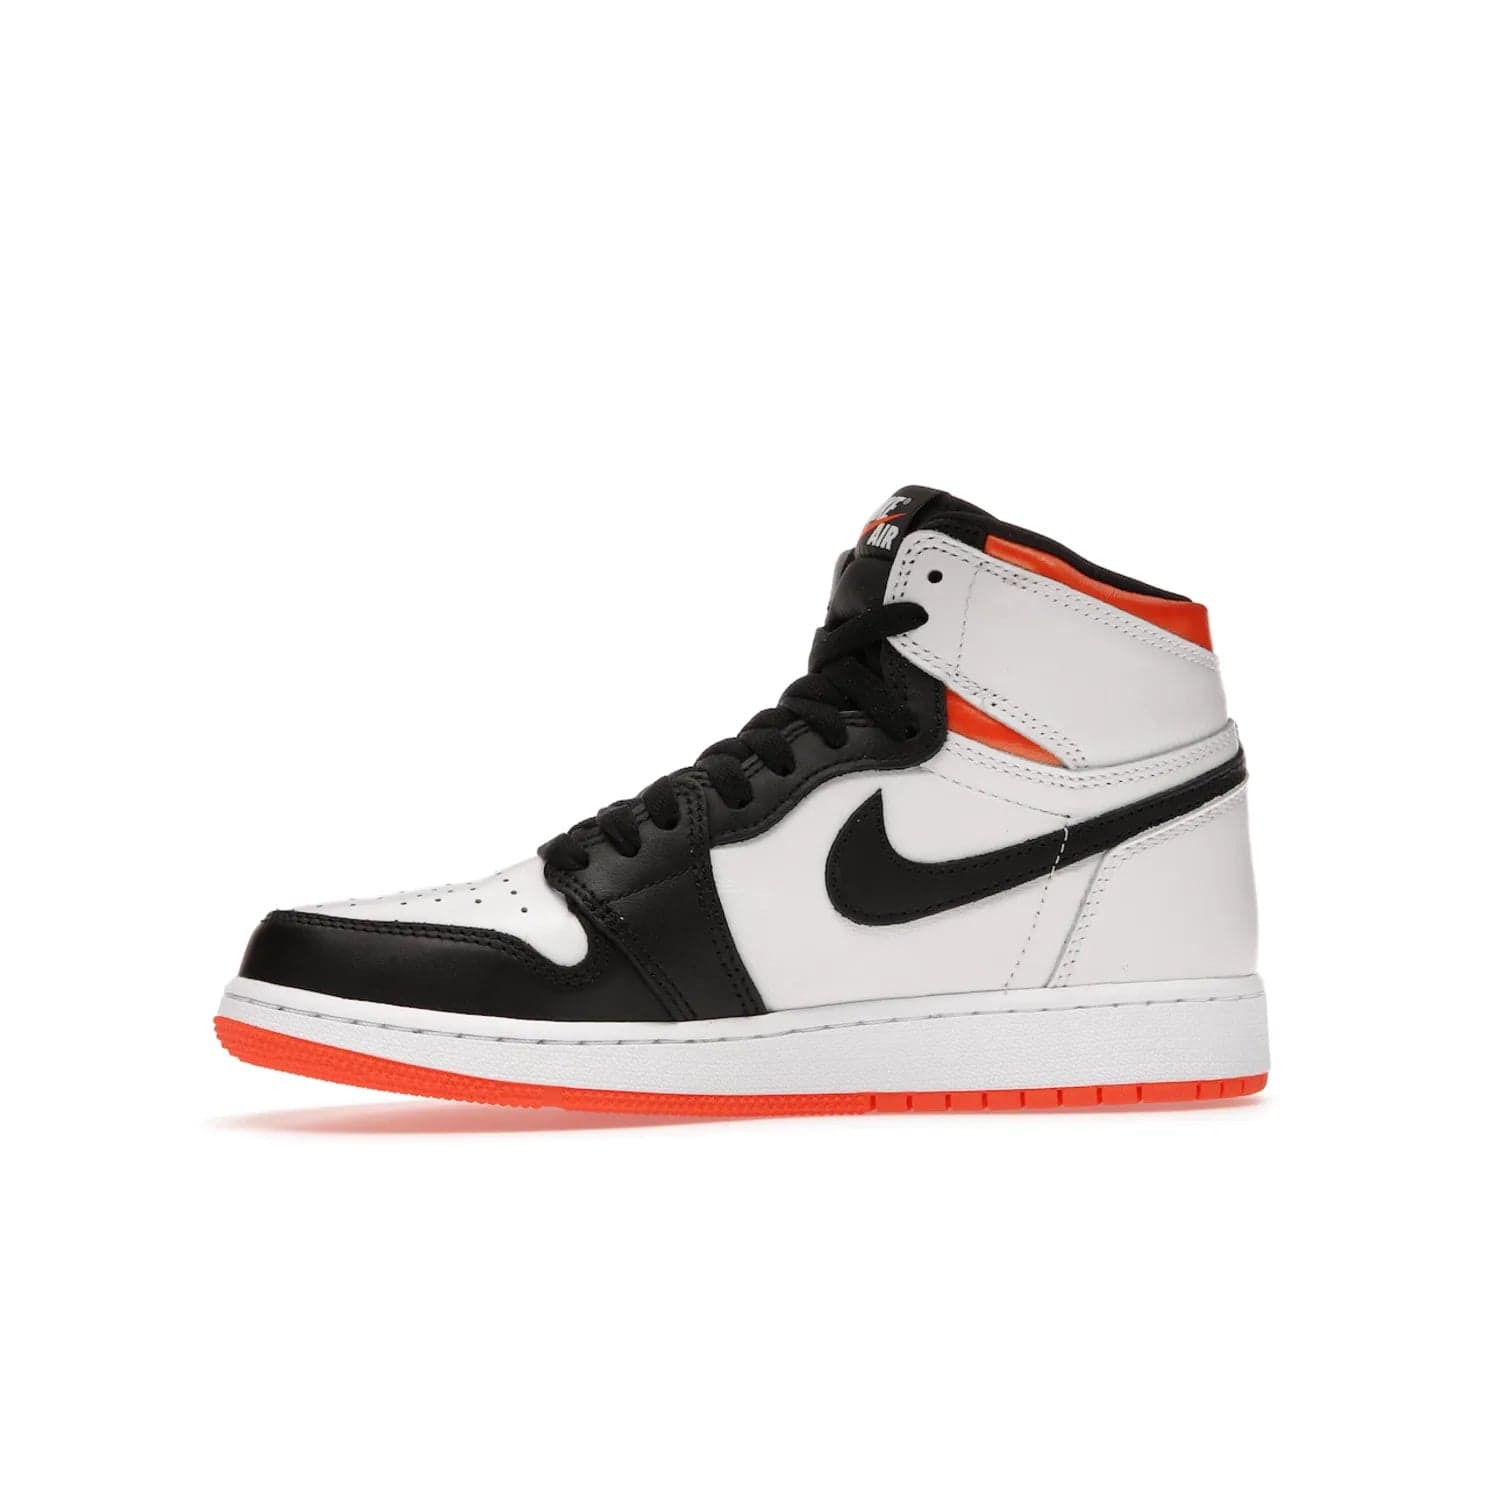 Jordan 1 High OG Electro Orange (GS) - Image 18 - Only at www.BallersClubKickz.com - The Air Jordan 1 High OG Electro Orange GS is the ideal shoe for kids on the go. Featuring white leather uppers, black overlays, and bright orange accents, it's sure to become a favorite. A great mix of classic style and vibrant colors, the shoe delivers air cushioning for comfort and hard orange rubber for grip. Release on July 17th, 2021. Get them a pair today.